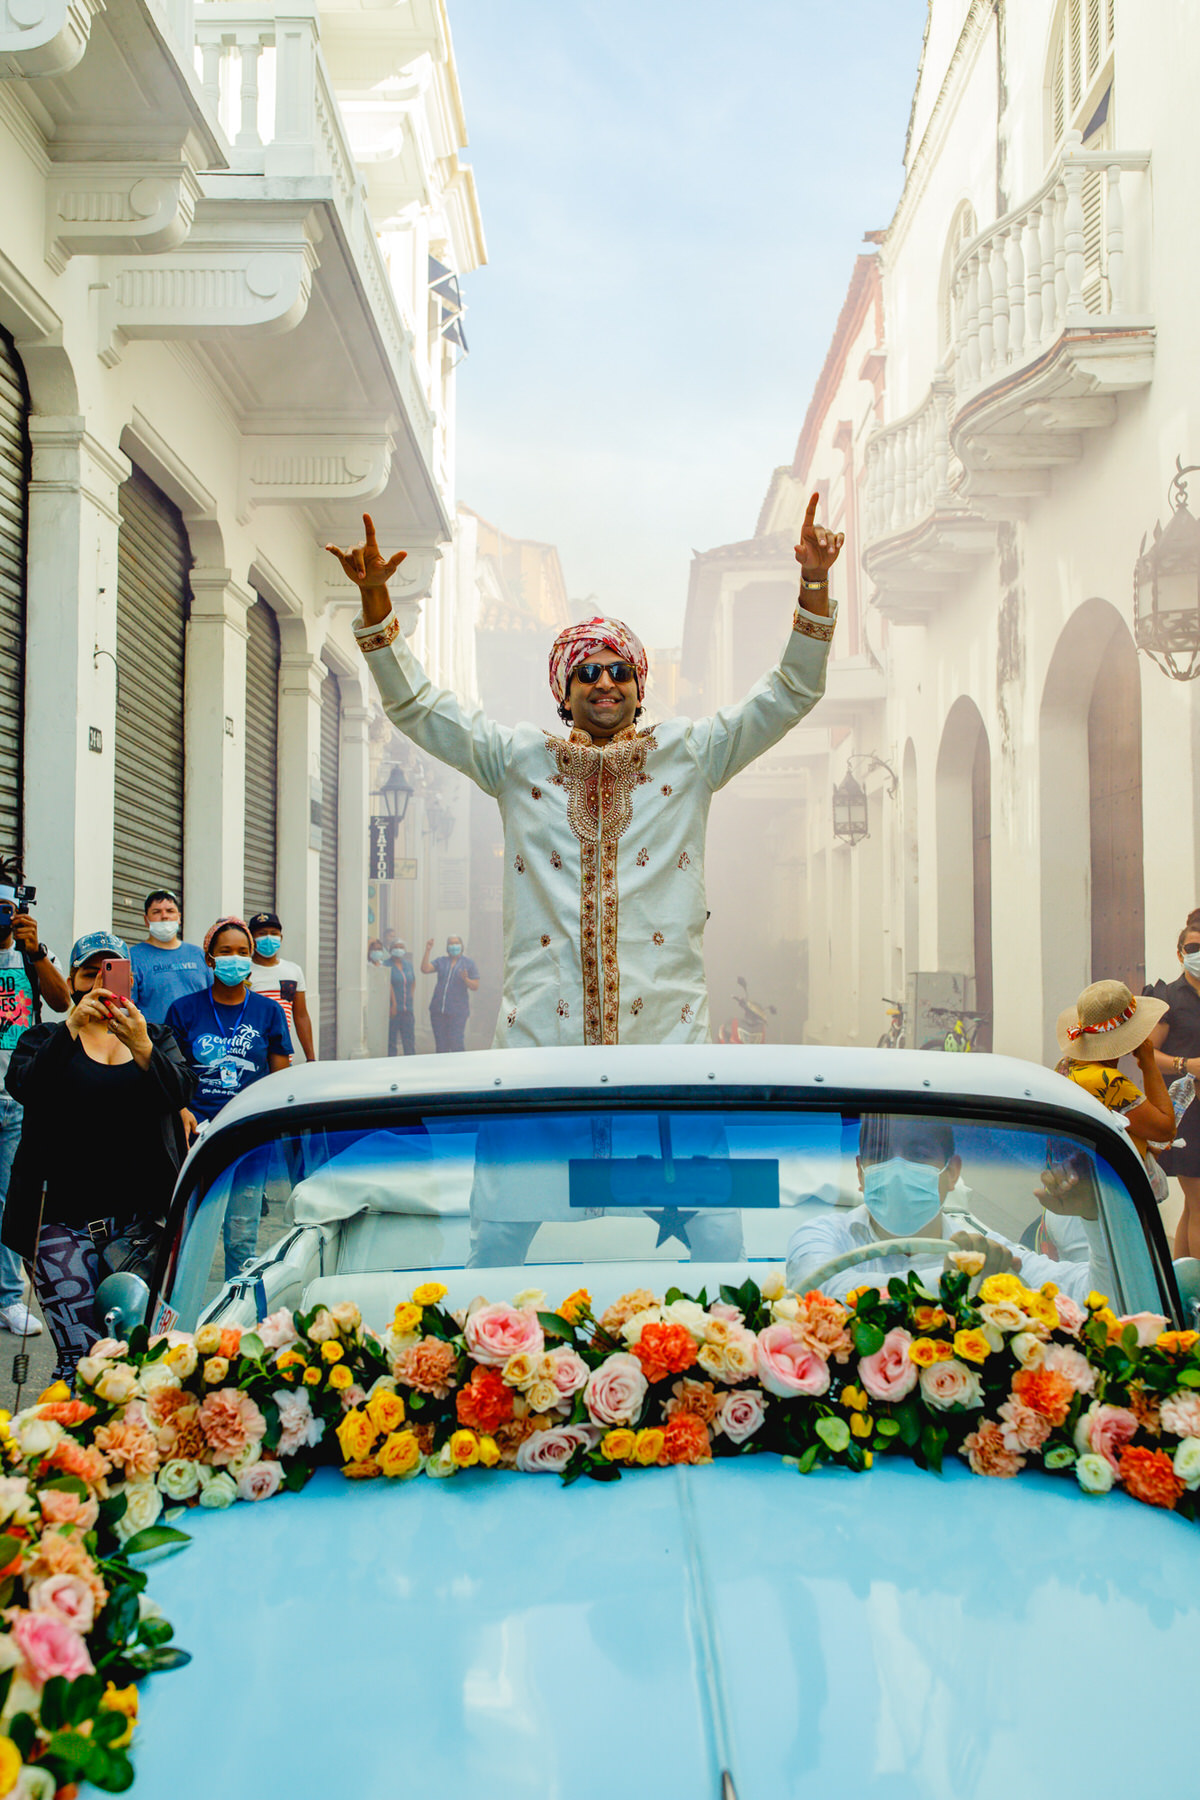 Festive baraat procession featuring the groom's grand arrival, accompanied by lively music and dancing in this Indian wedding in Cartagena.